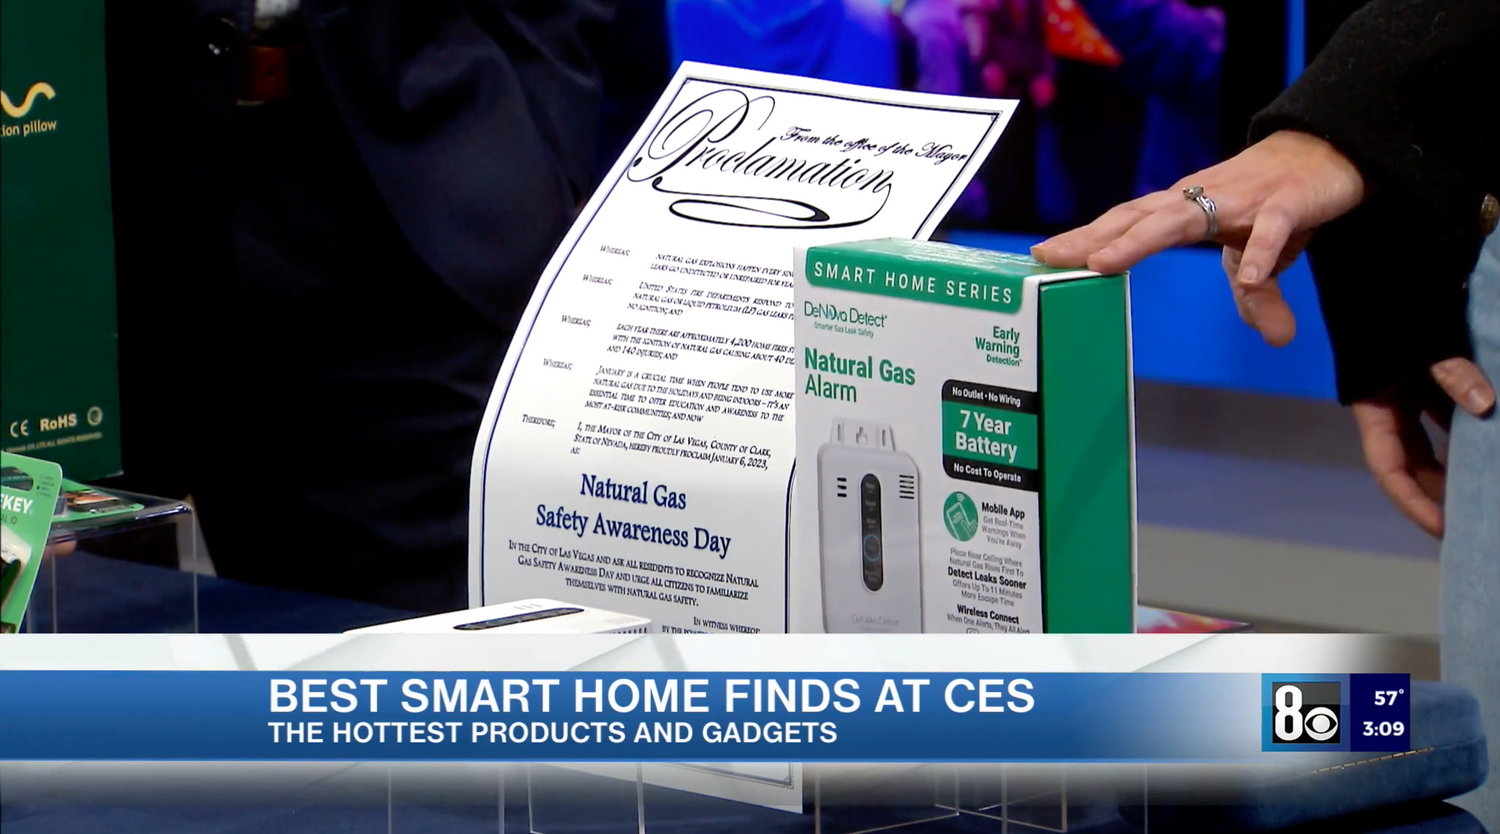 Best Smart Home Finds At CES